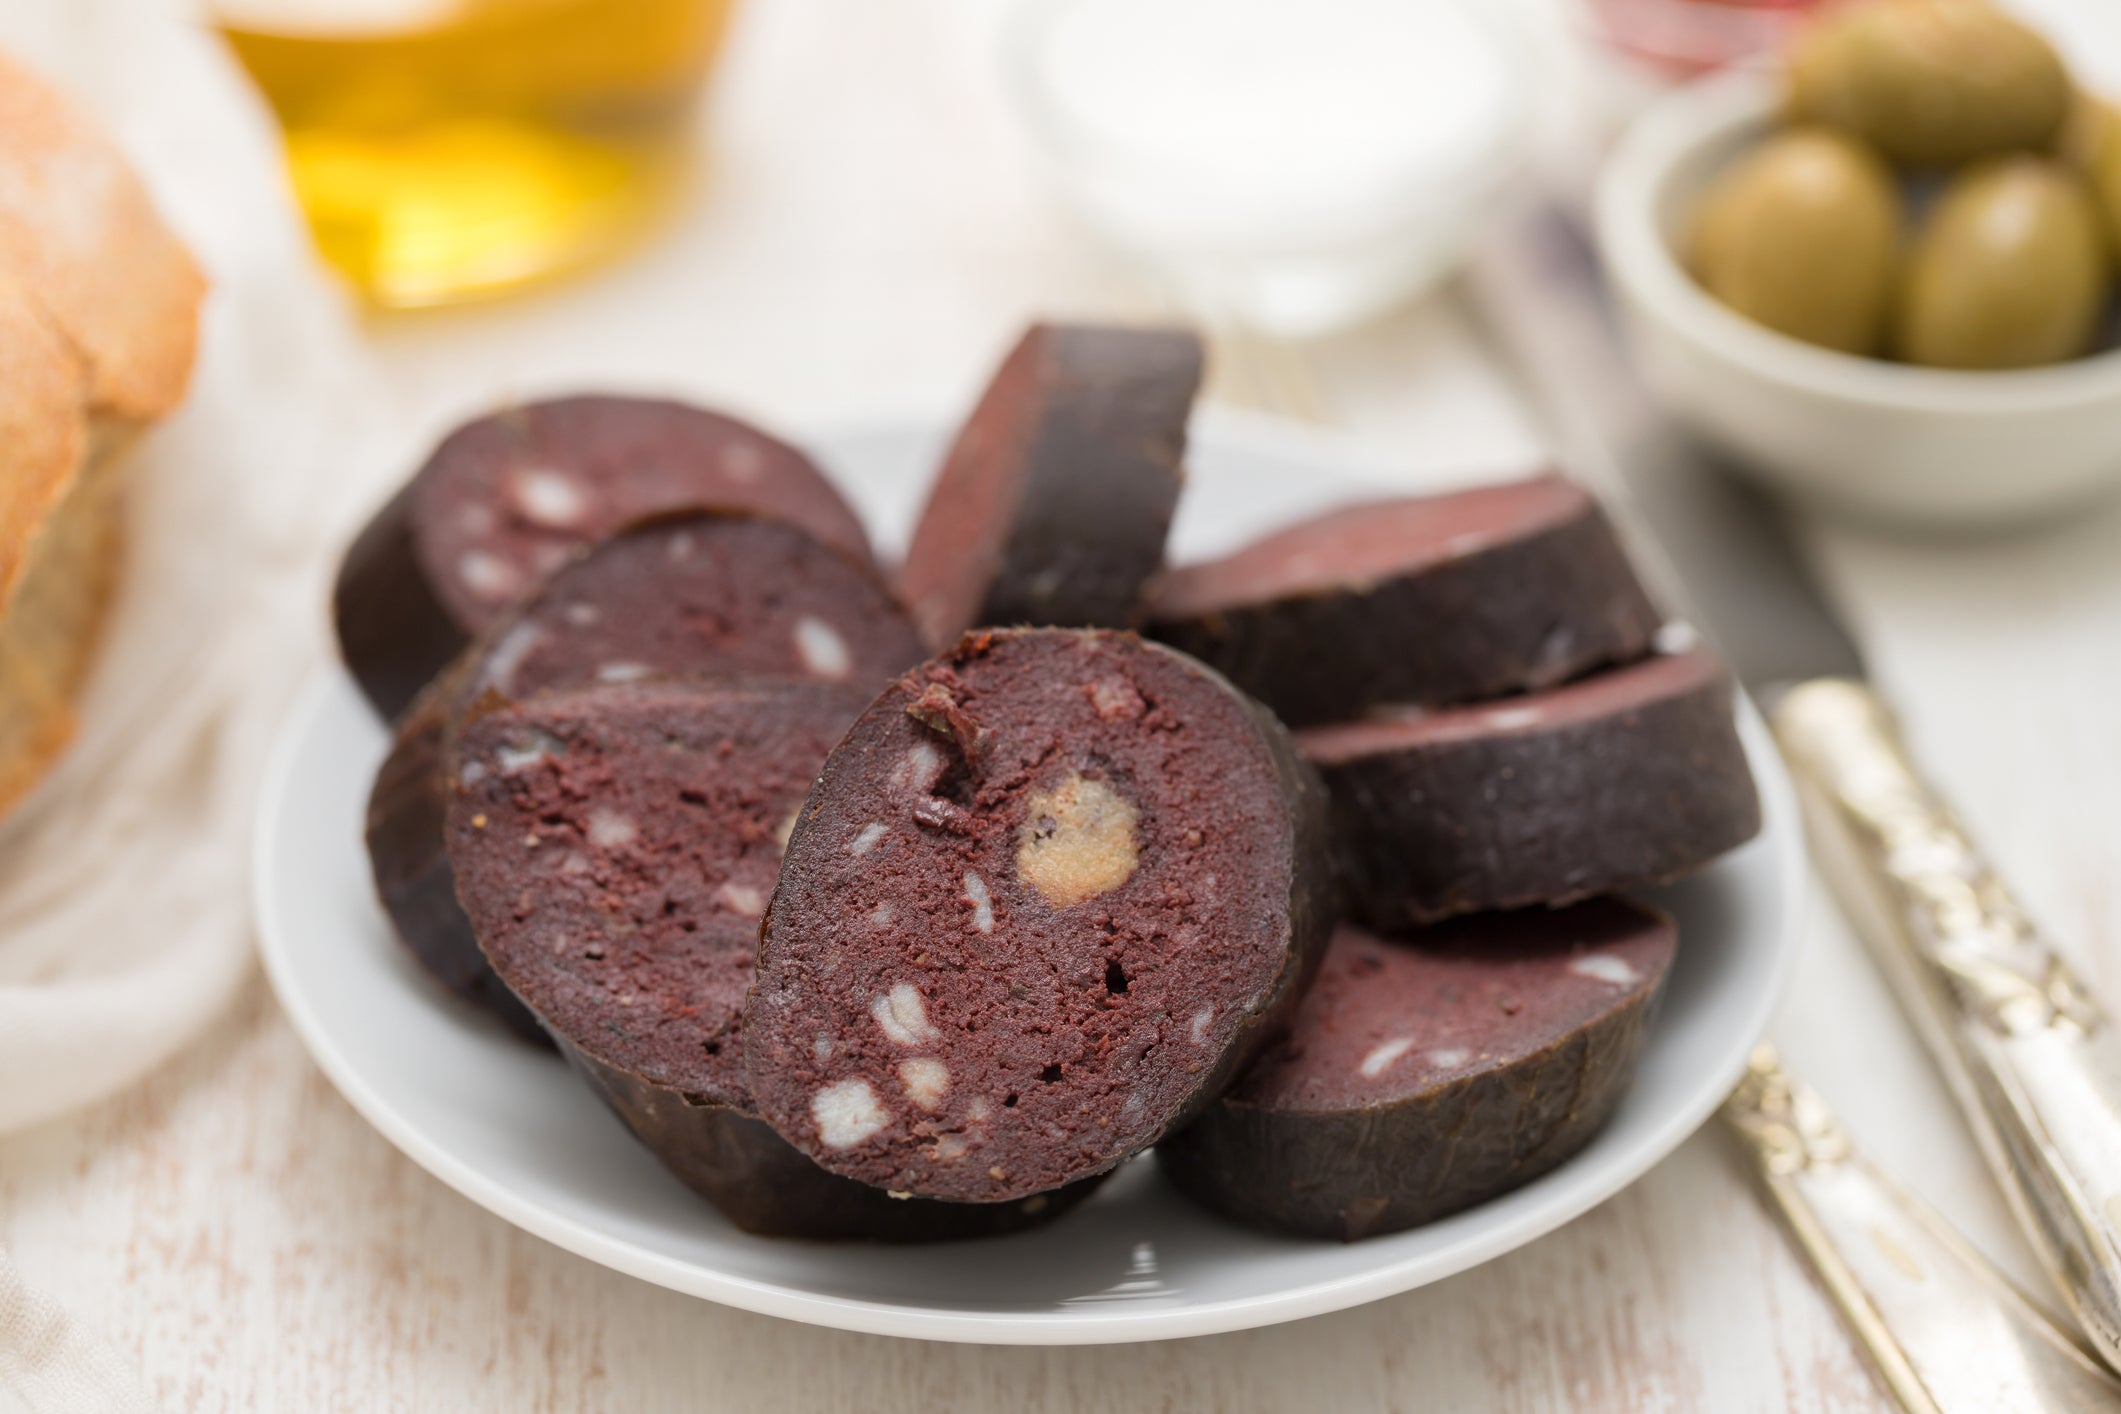 In another era, fridges across the land would have a plate of black pudding in their fridge